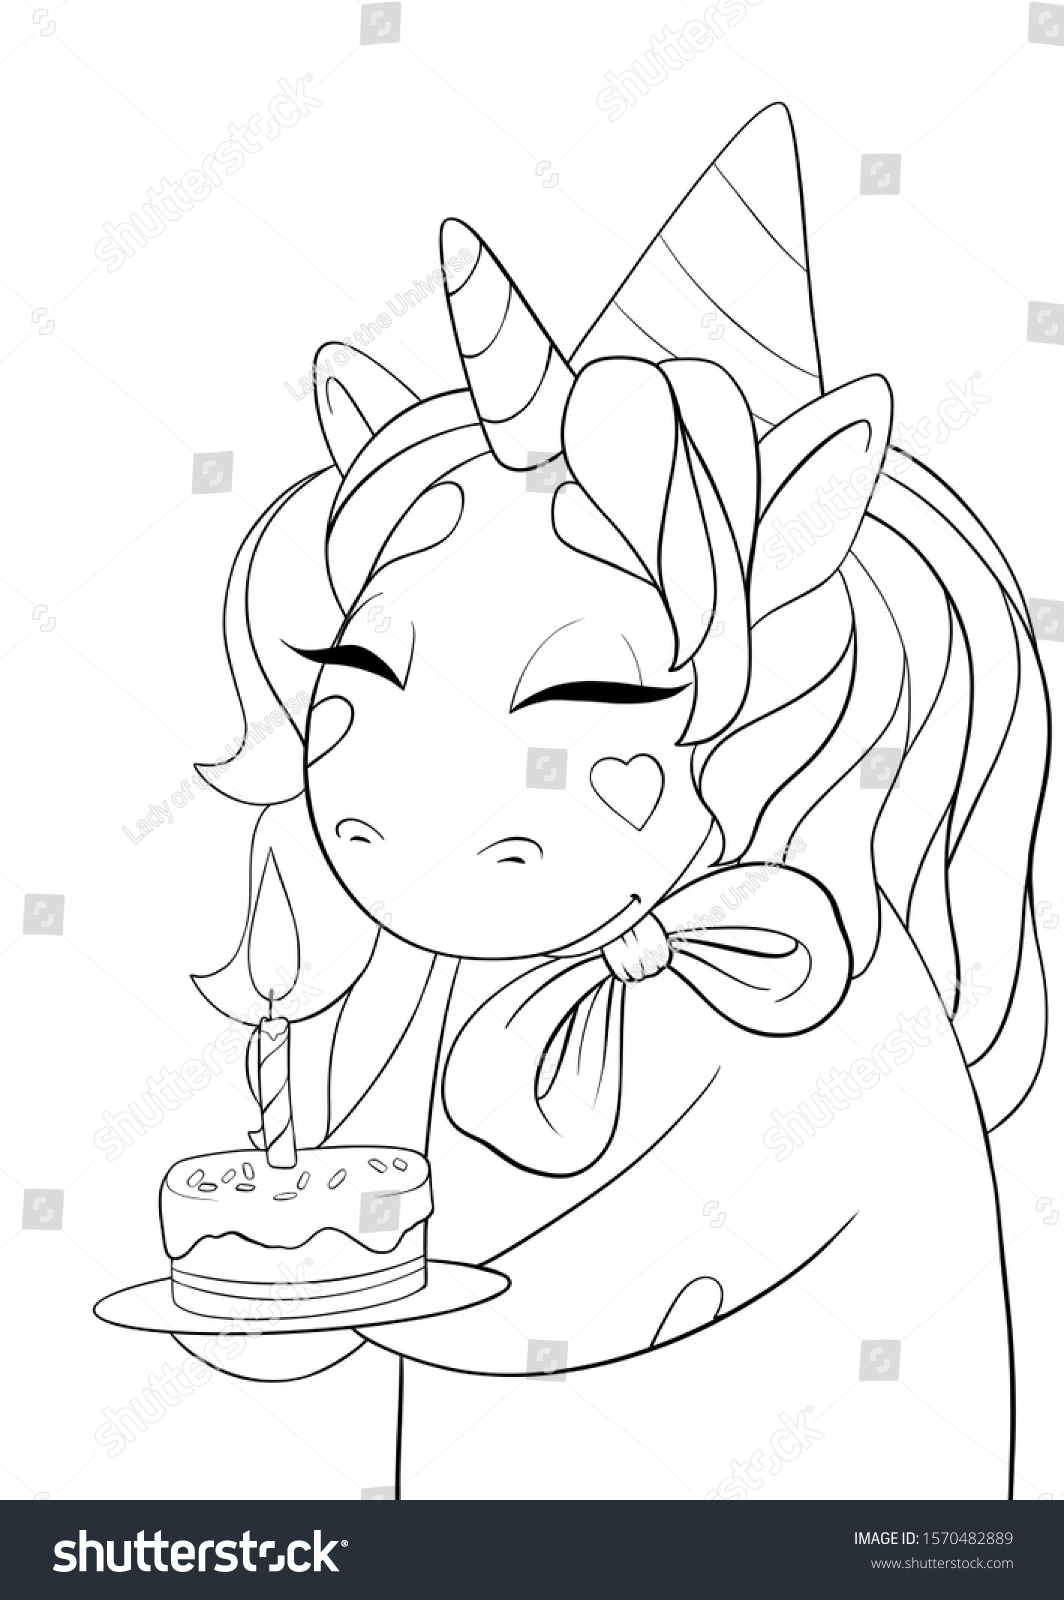 Unicorn Birthday Cake Coloring Pages - img-weed